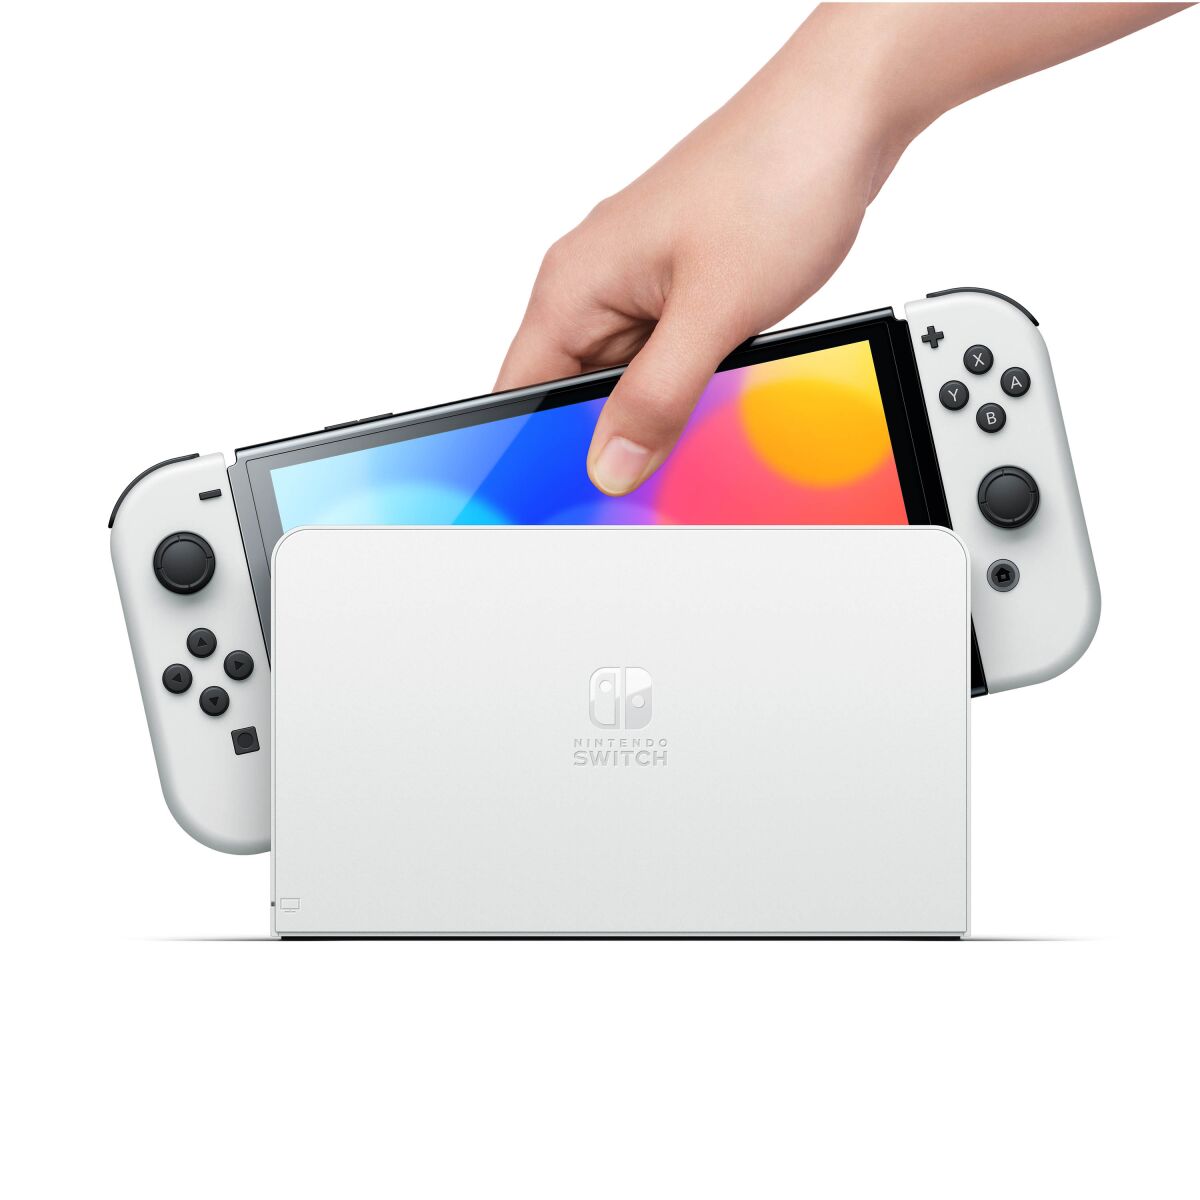 A hand lifts a Nintendo Switch out of its dock.